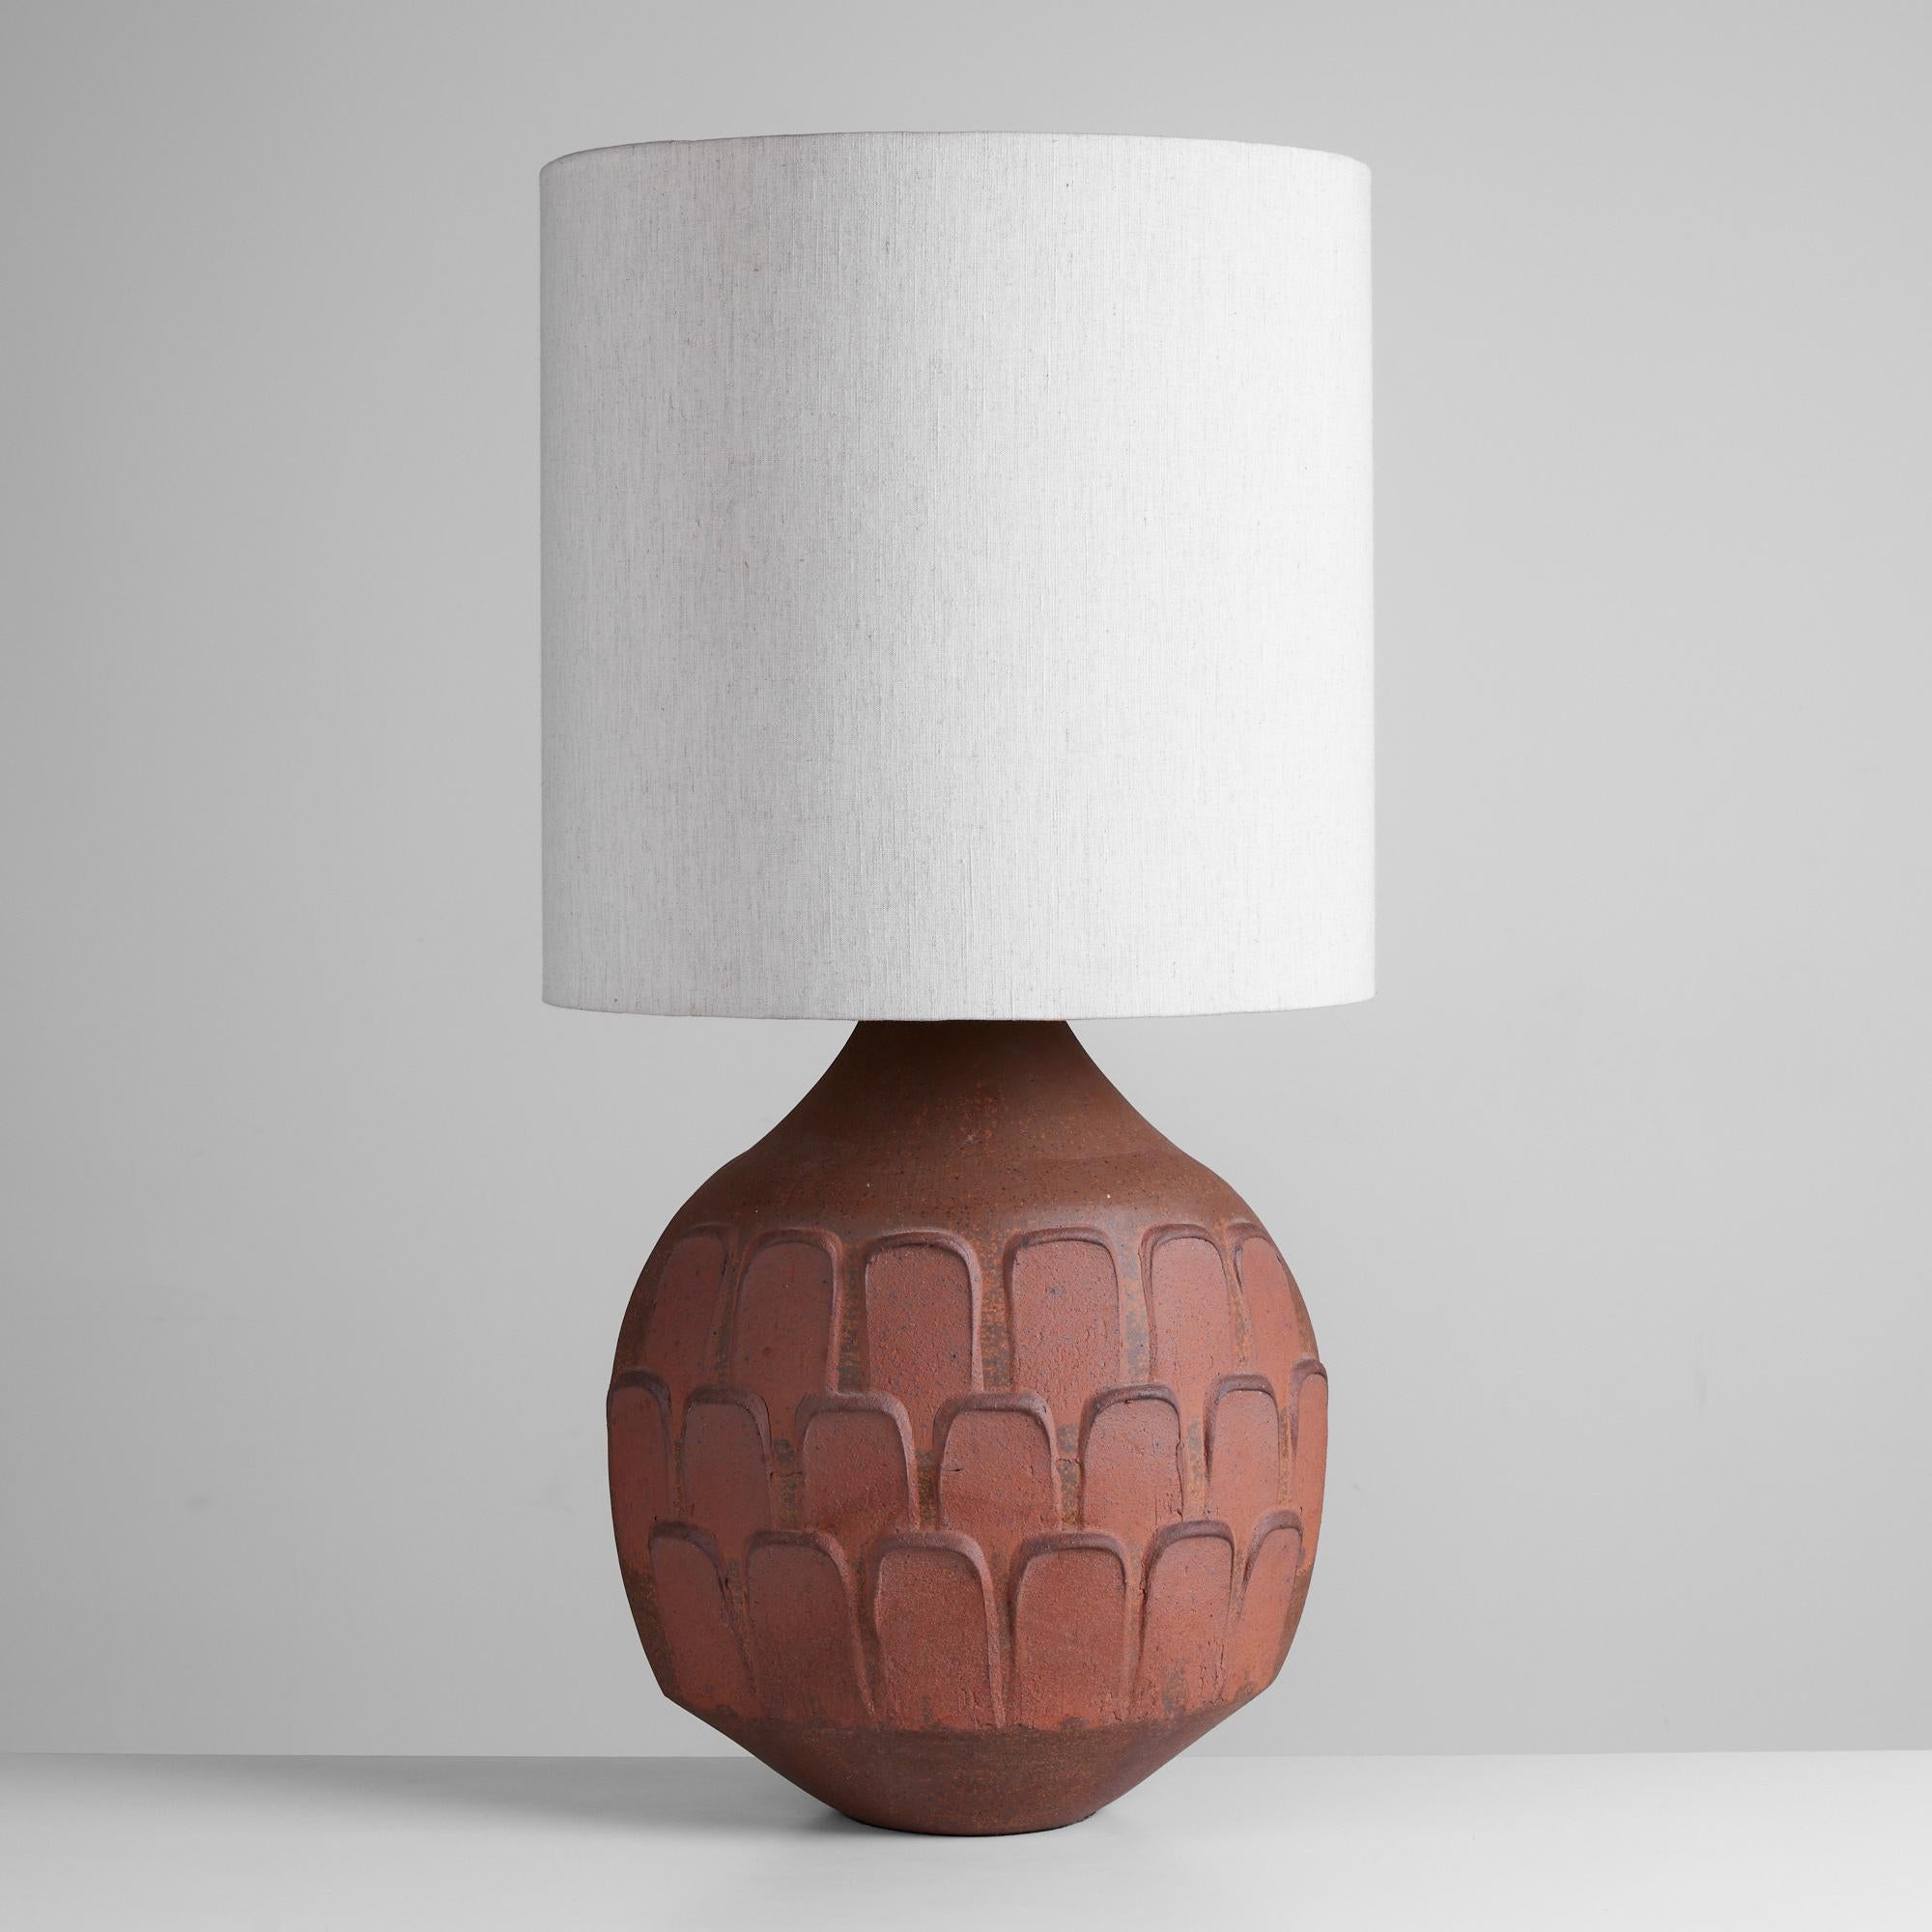 David Cressey stoneware lamp, USA, c.1960s. The wheel thrown stoneware lamp features the iconic leaf pattern throughout the lamp base. The oval ceramic base is a speckled brown and red glaze. The newly rewired lamp has a linen shade.

Dimensions: